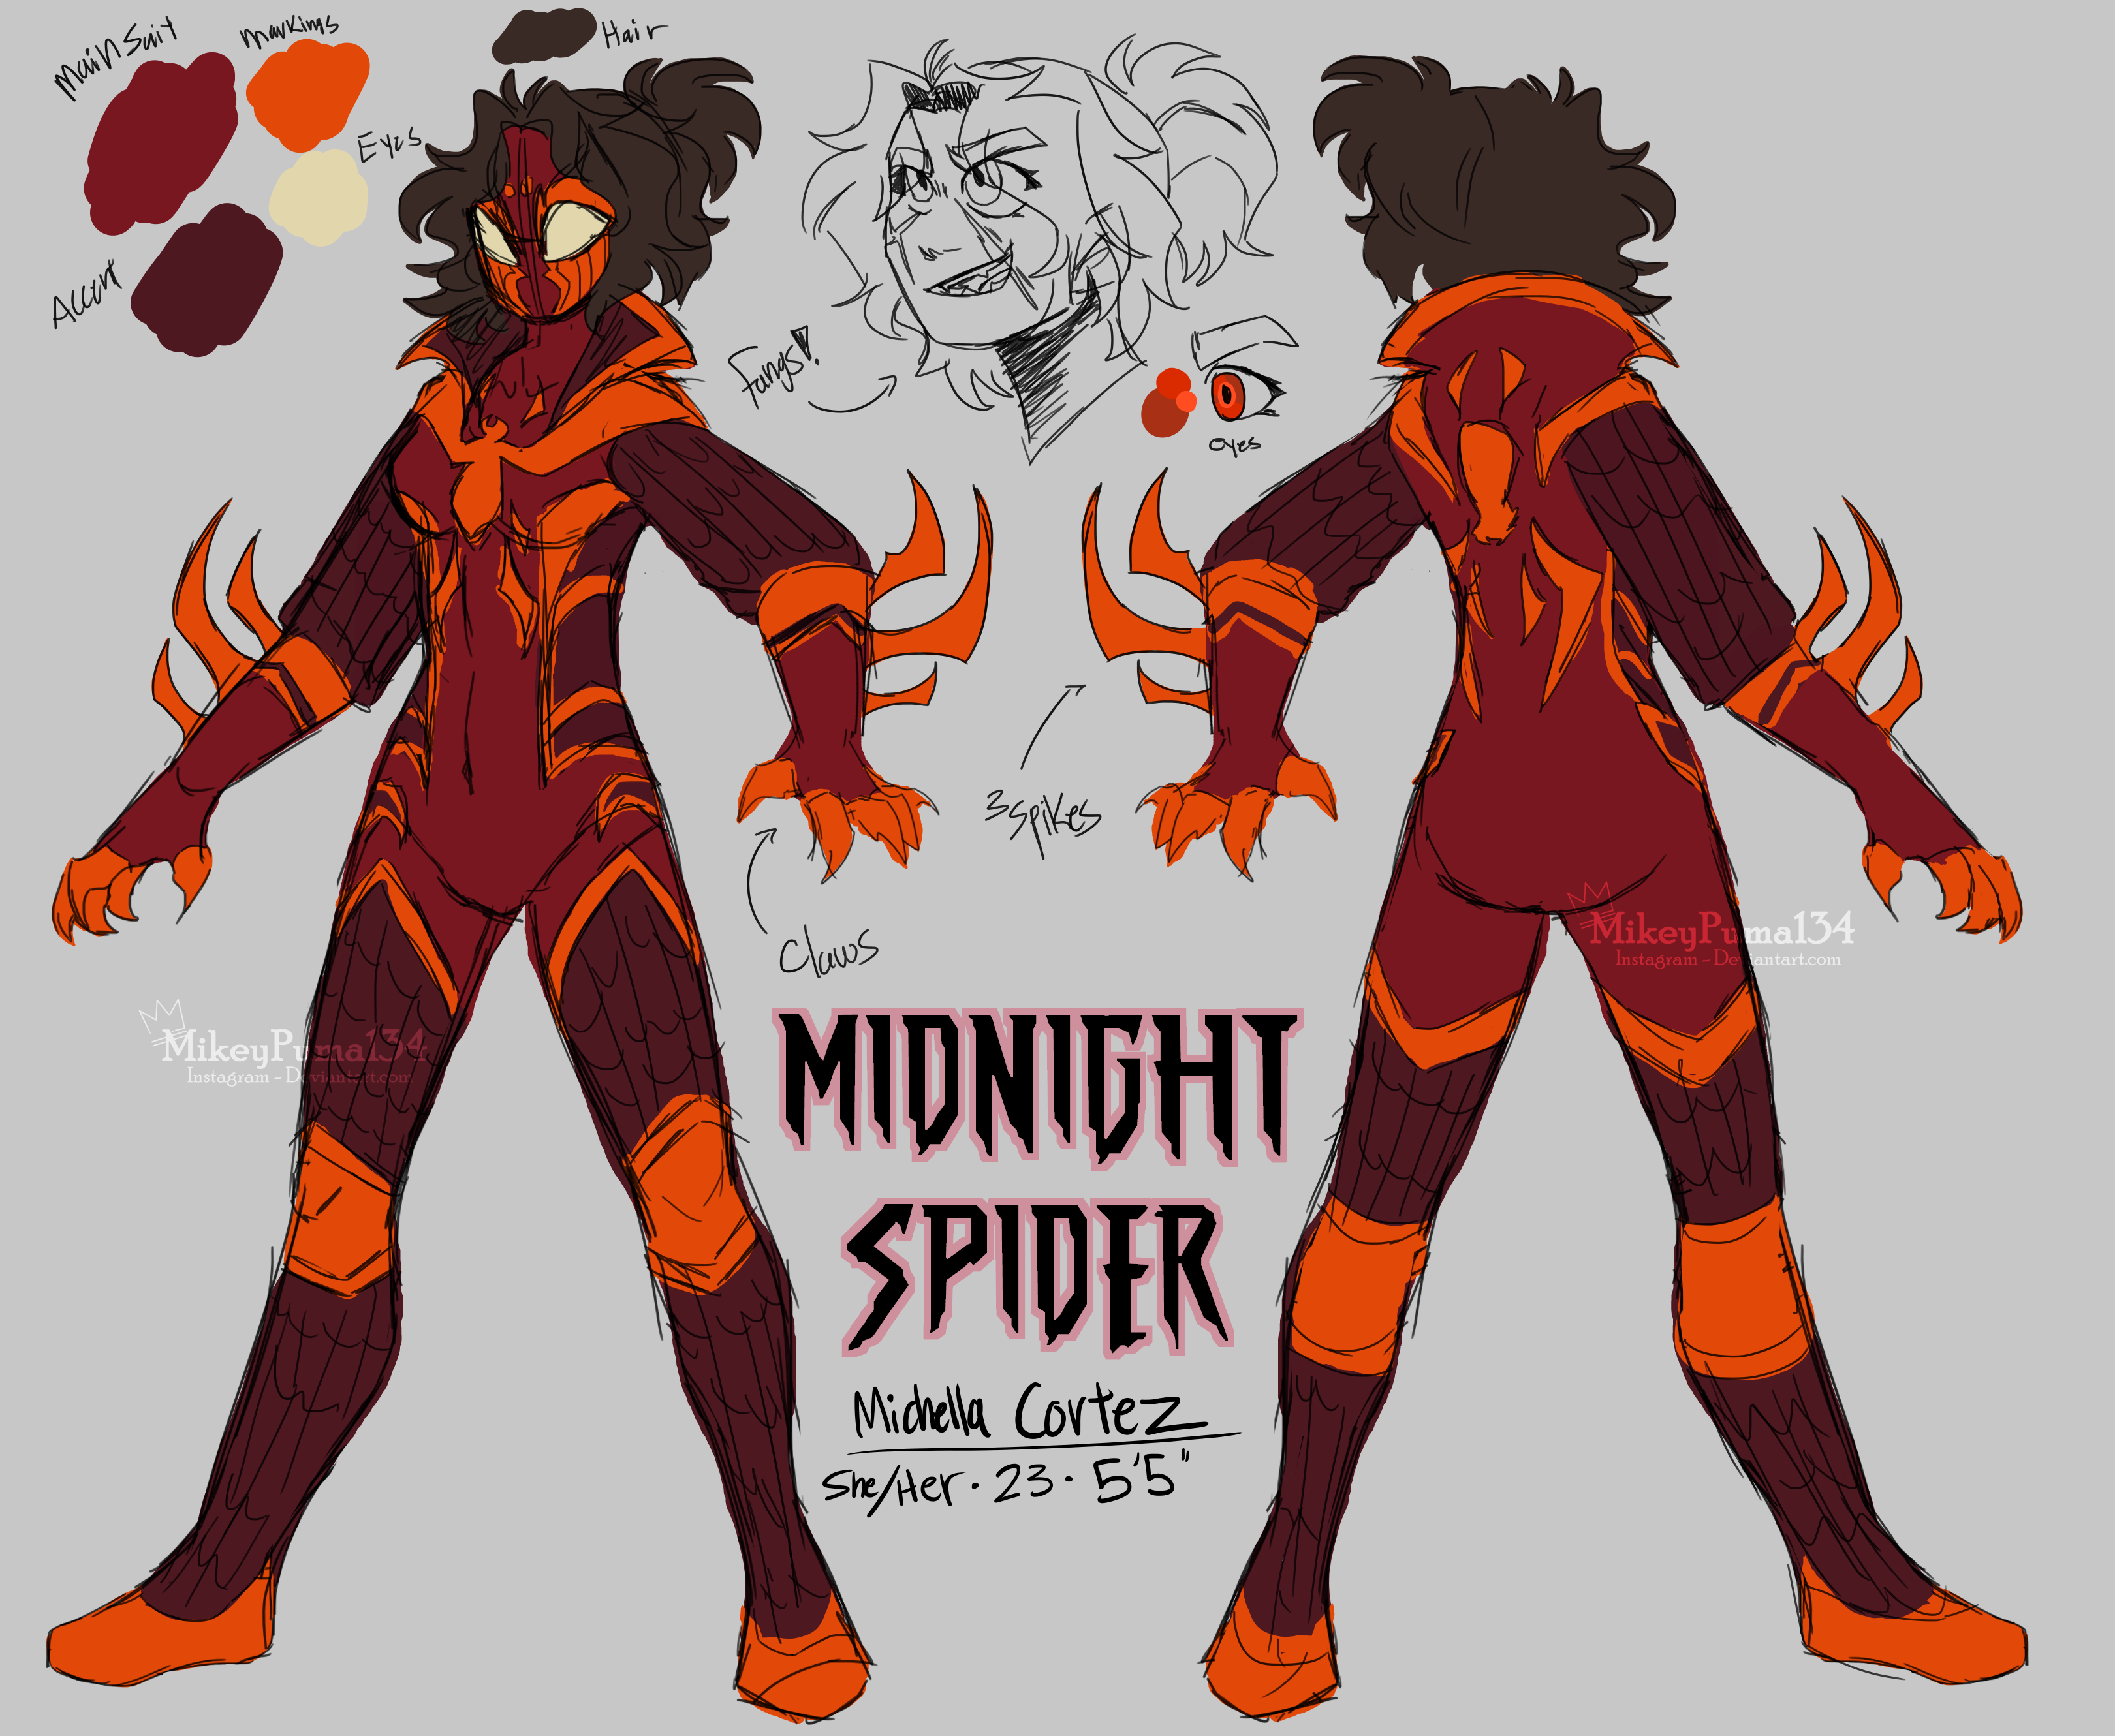 P4️⃣NX on X: Spider-NightCat is one heck of a name #spidersona  #DrawYourSpiderVerse #SpiderVerse  / X